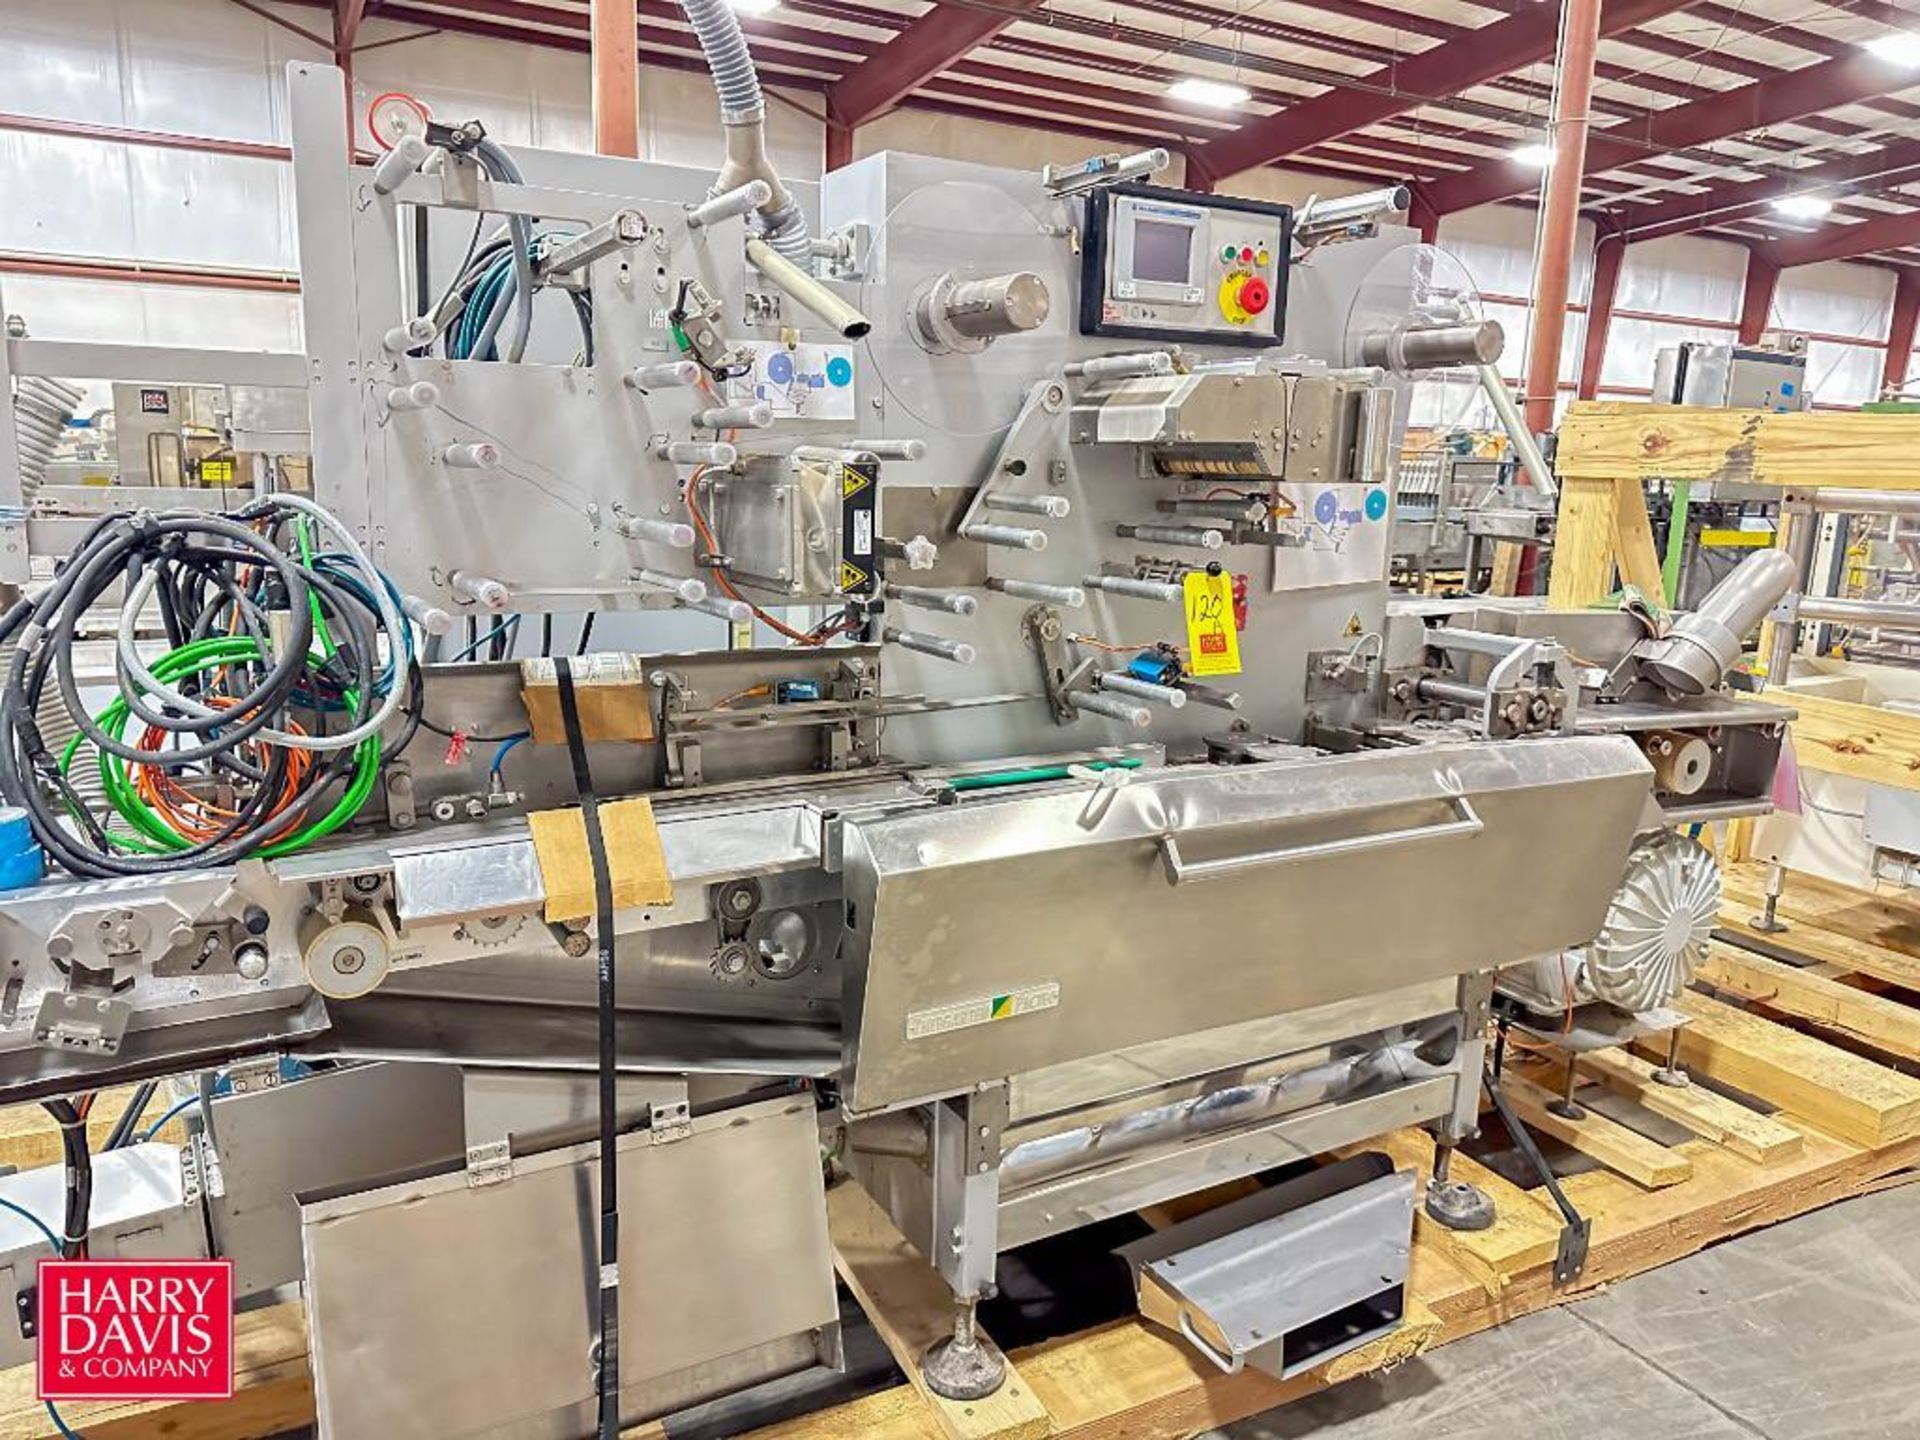 THEEGARTEN PACTEC Wrapper, Model: FPC5, S/N: FPC5004 with Vacuum Blower and Allen-Bradley PanelView